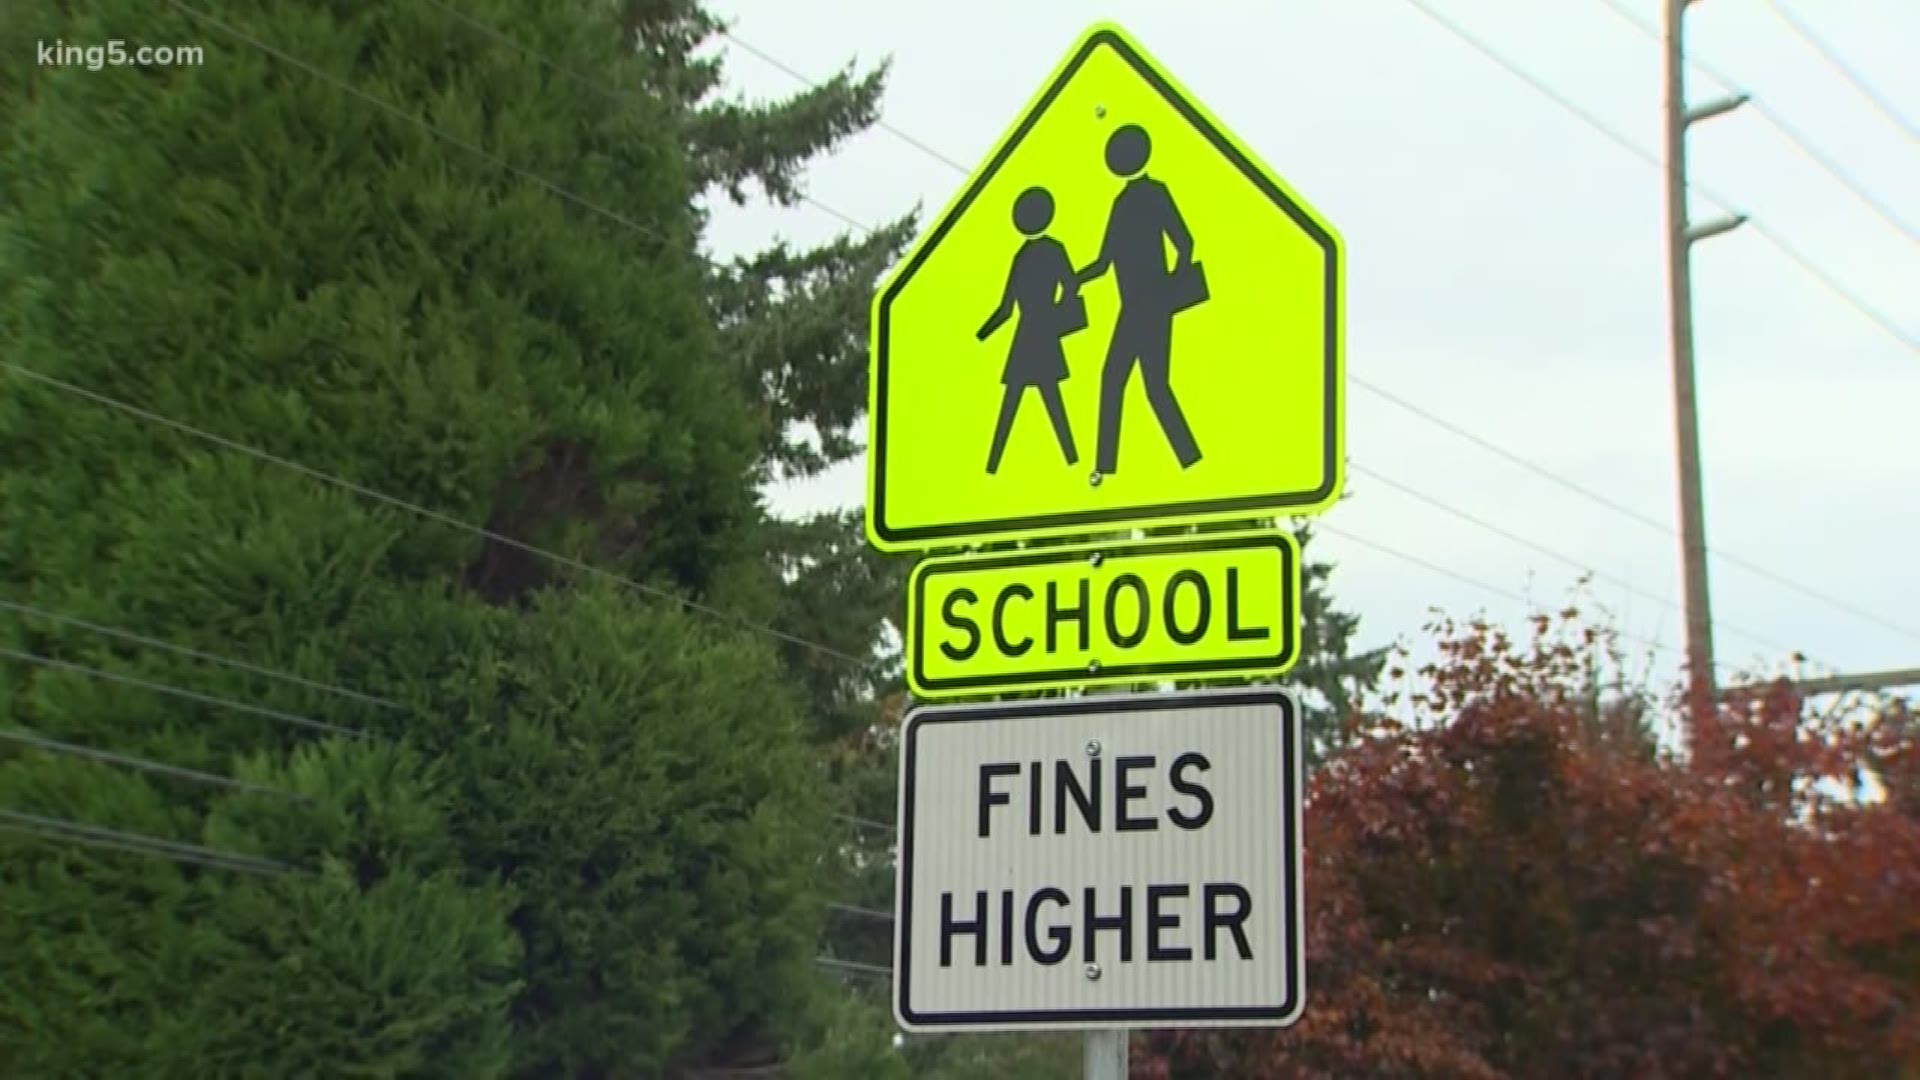 The City of Kirkland hopes speed cameras will slow down drivers near school zones. KING 5's Amy Moreno reports.